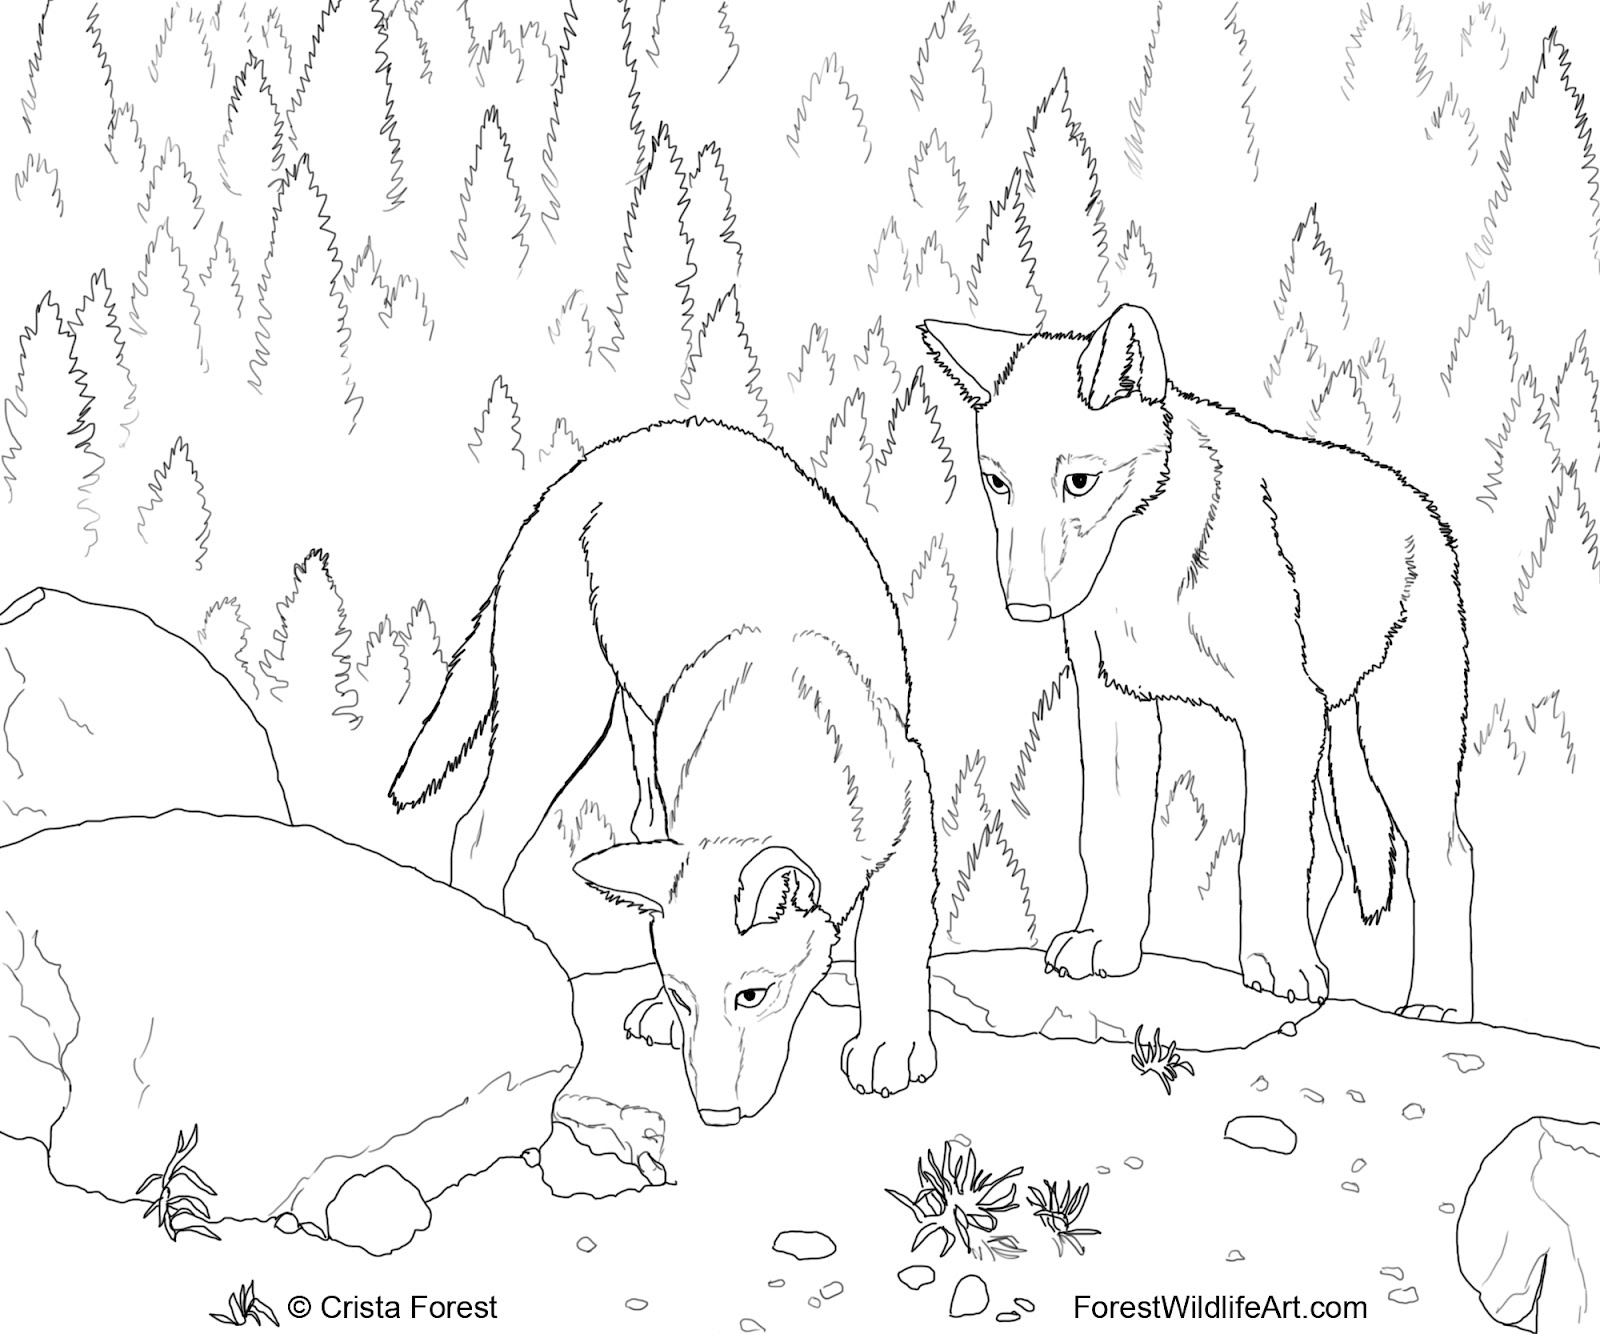 Crista Forest's Animals & Art: Wolf Pups Coloring Book Page